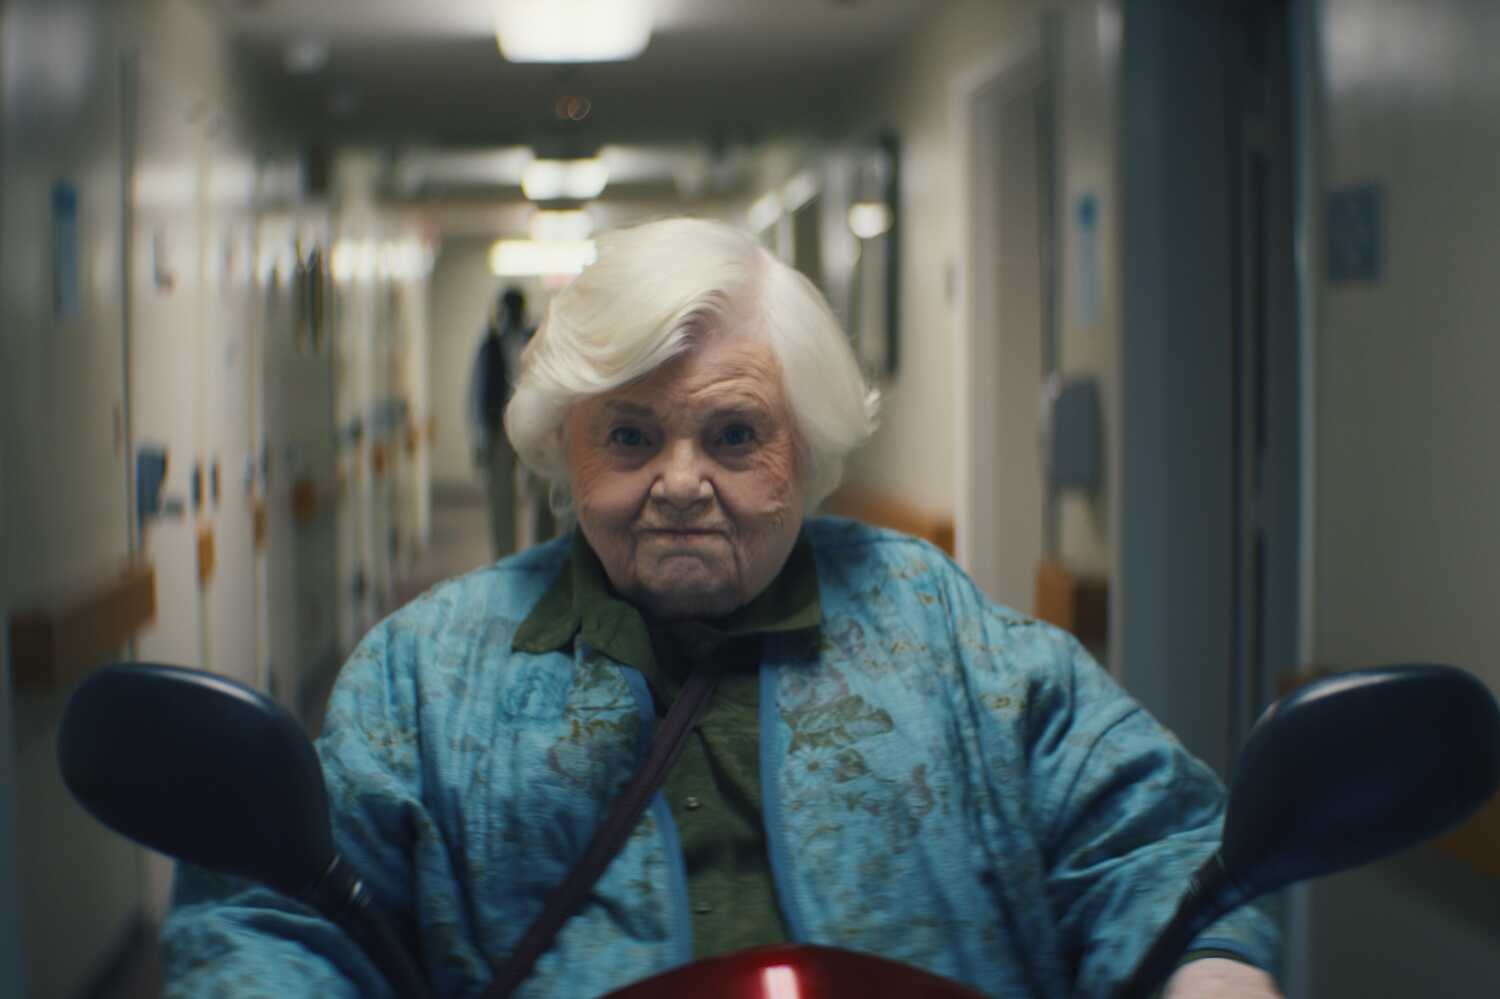 June Squibb in “Thelma,” as a grandmother determined to recover the money she lost in a scam.